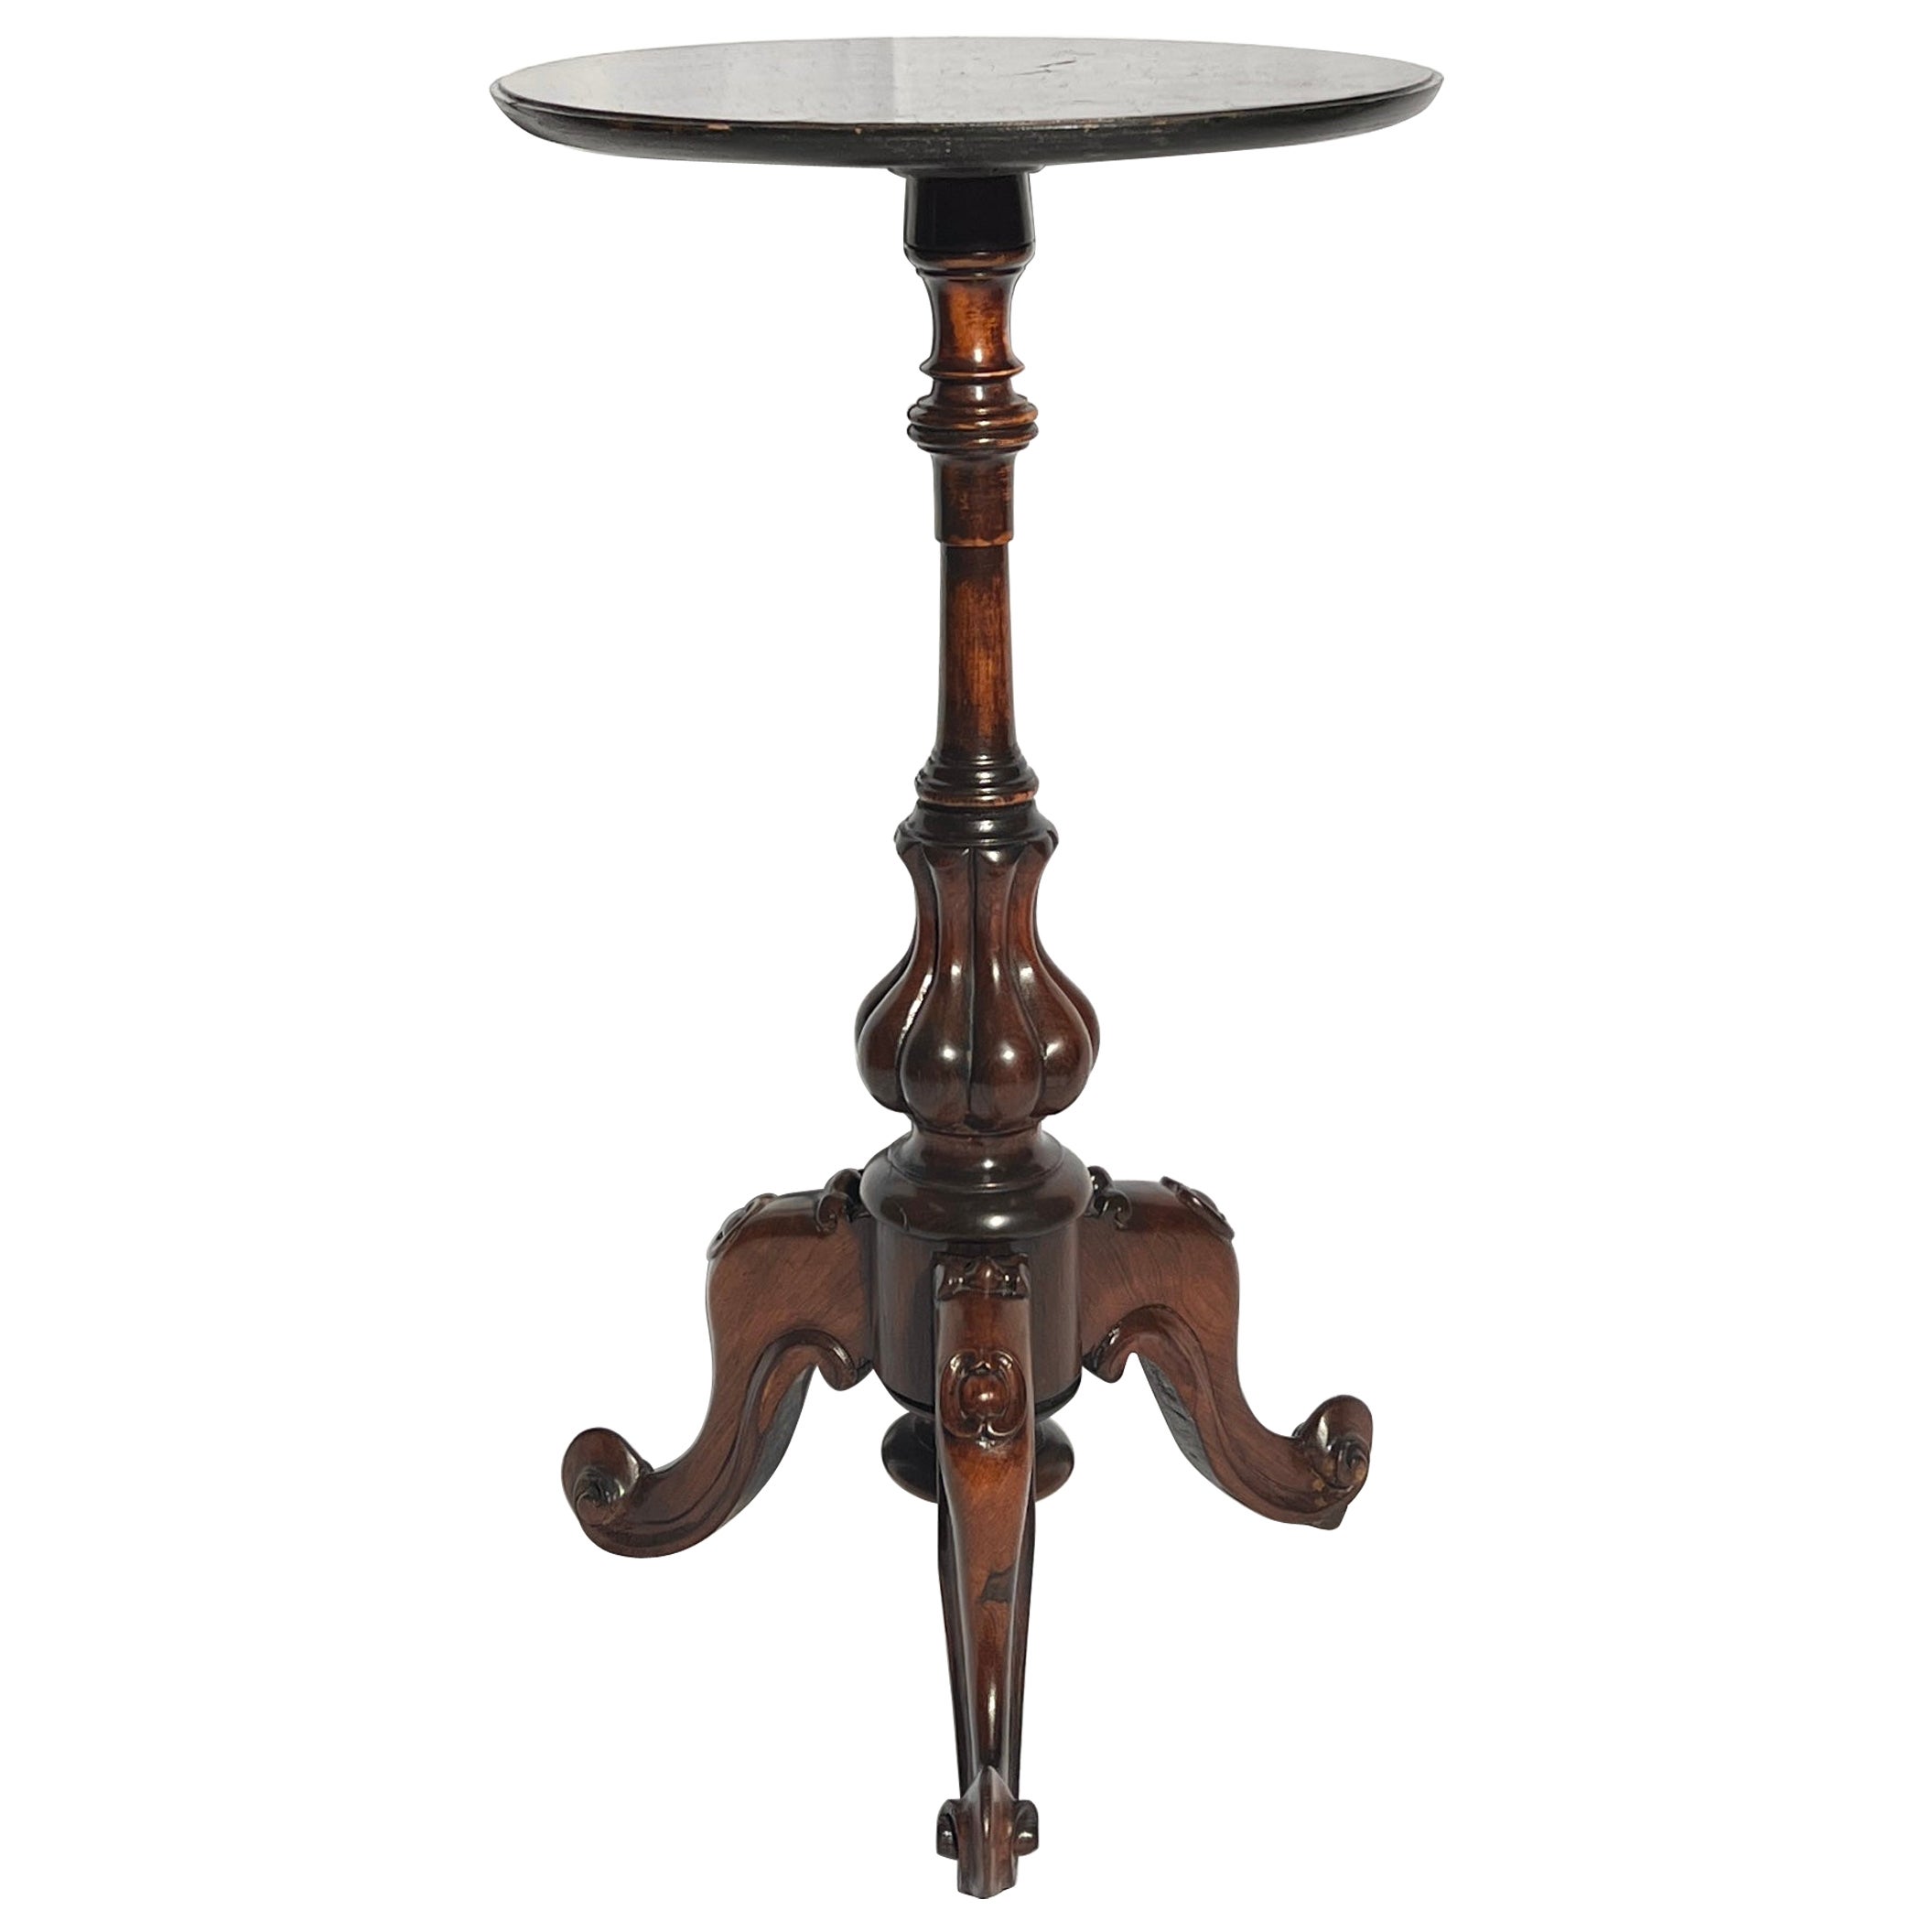 Antique English Walnut and Rosewood Table, Circa 1870.